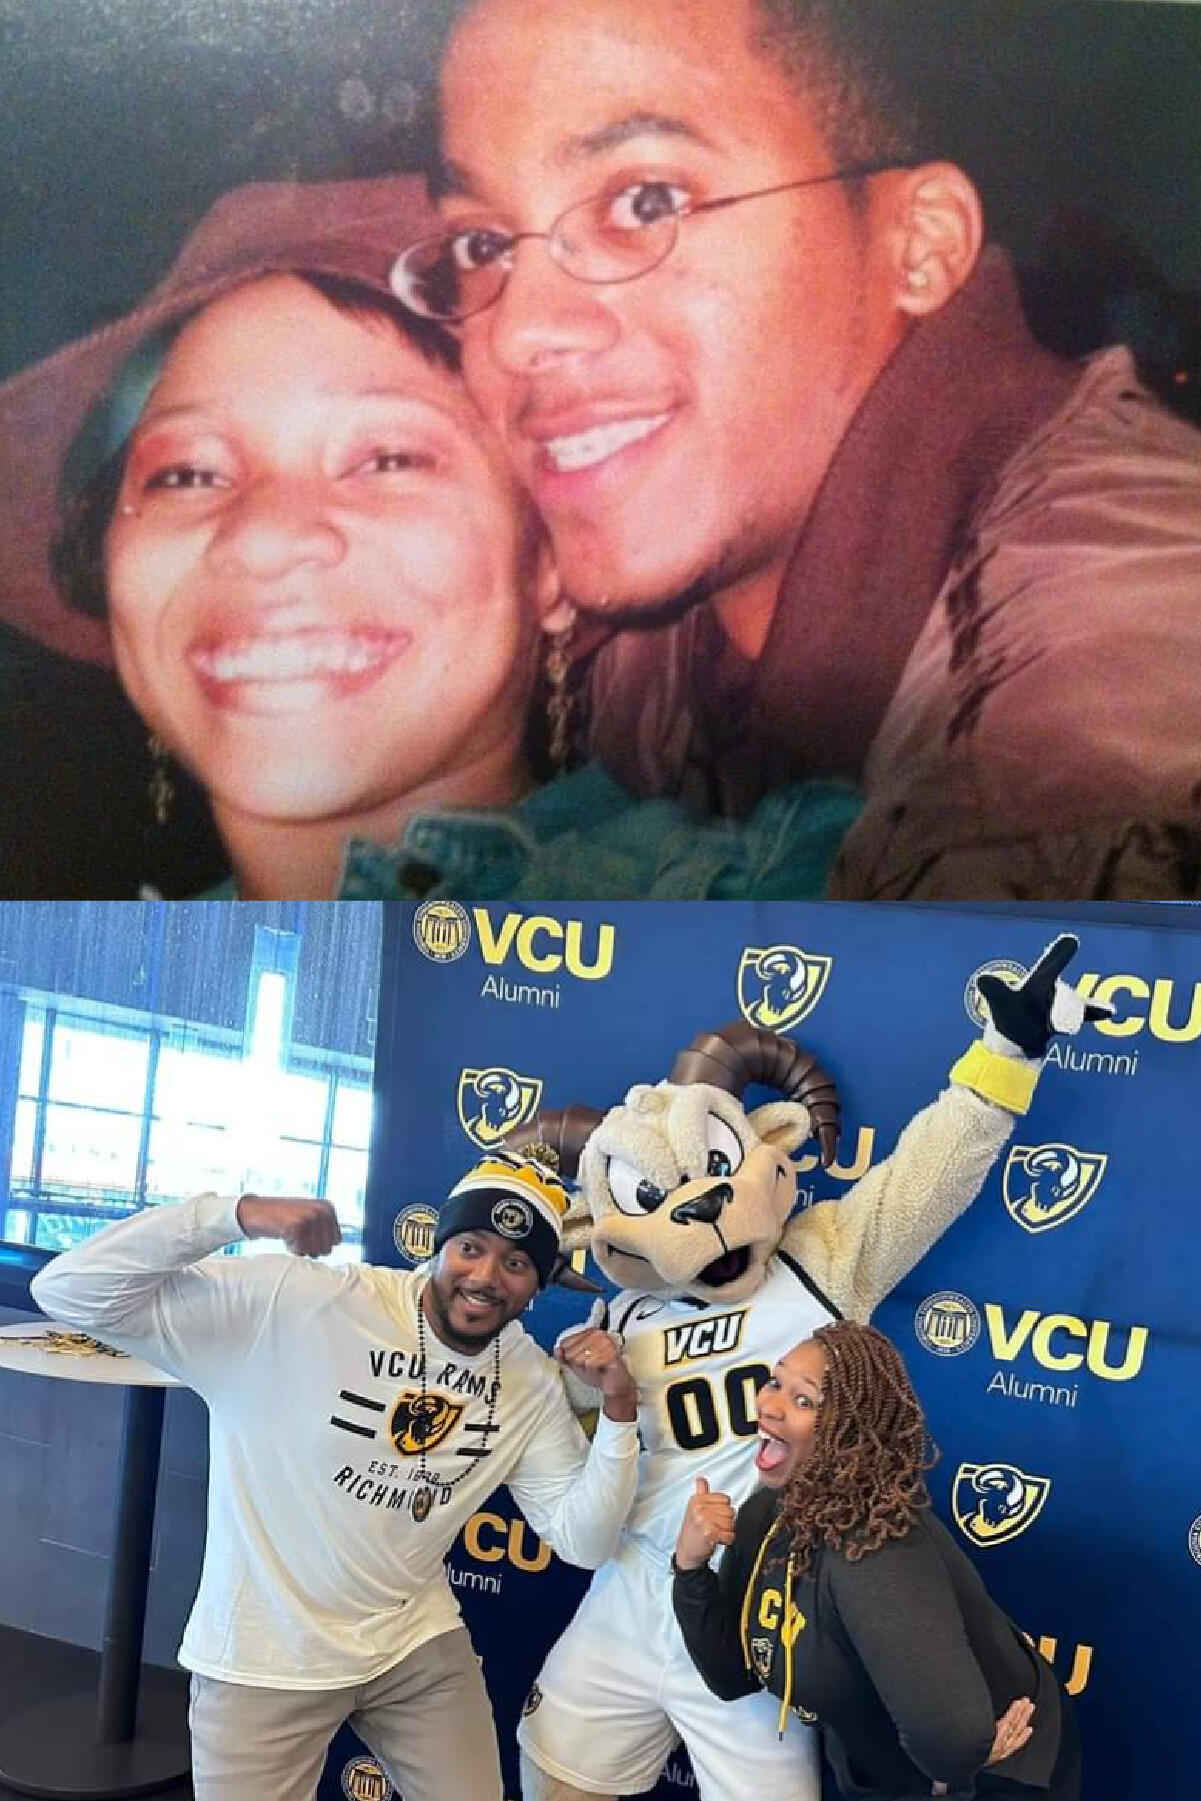 At the top is a photo of a young man and woman's faces. On the bottom is a photo of the same man and woman, but older, posing with a Rodney the Ram mascot. 